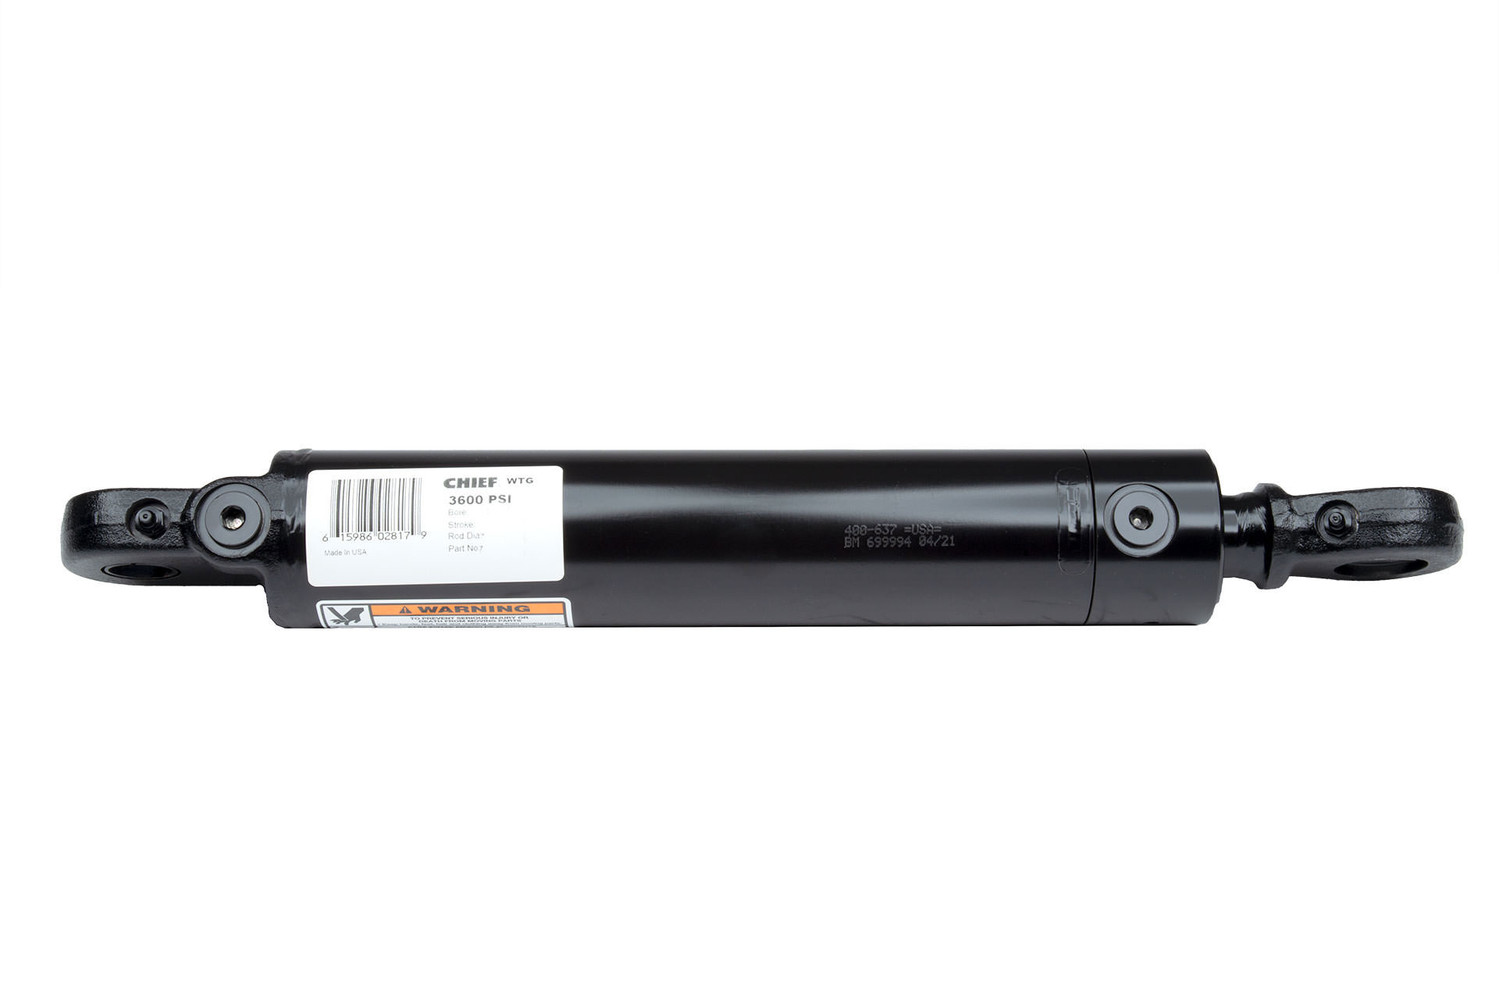 CHIEF WTG WELDED TANG HYDRAULIC CYLINDER: 2" BORE X 8" STROKE - 1.125" ROD